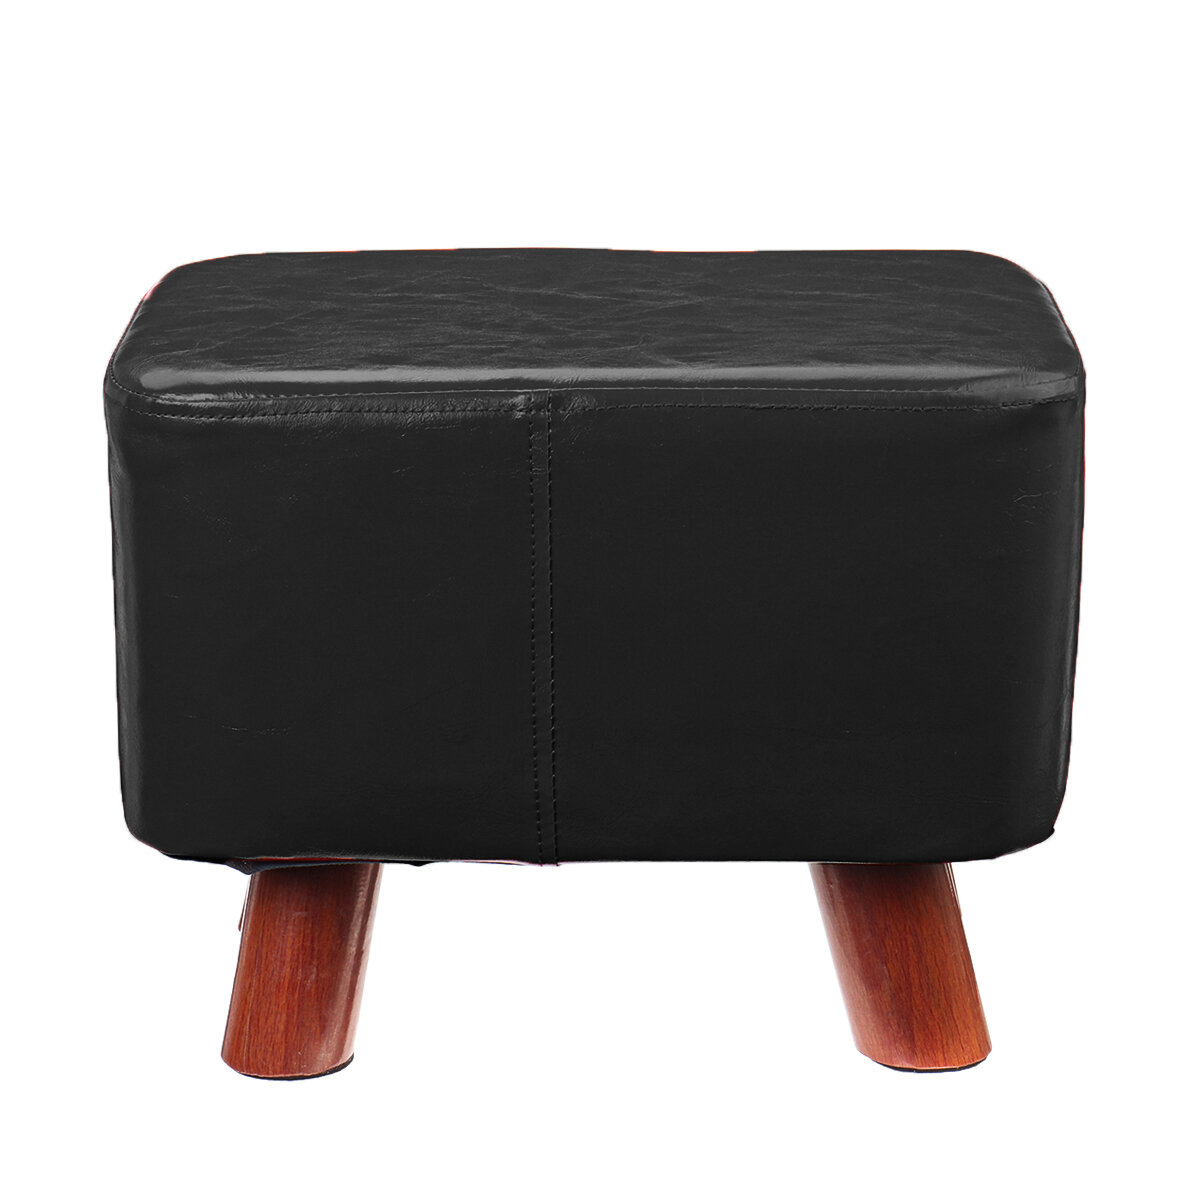 

PU Soft Foot Stool Soft Change Shoes Bench Small Ottoman Footrest Footstool Wooden Legs Rectangular Seat Stool Home Supp